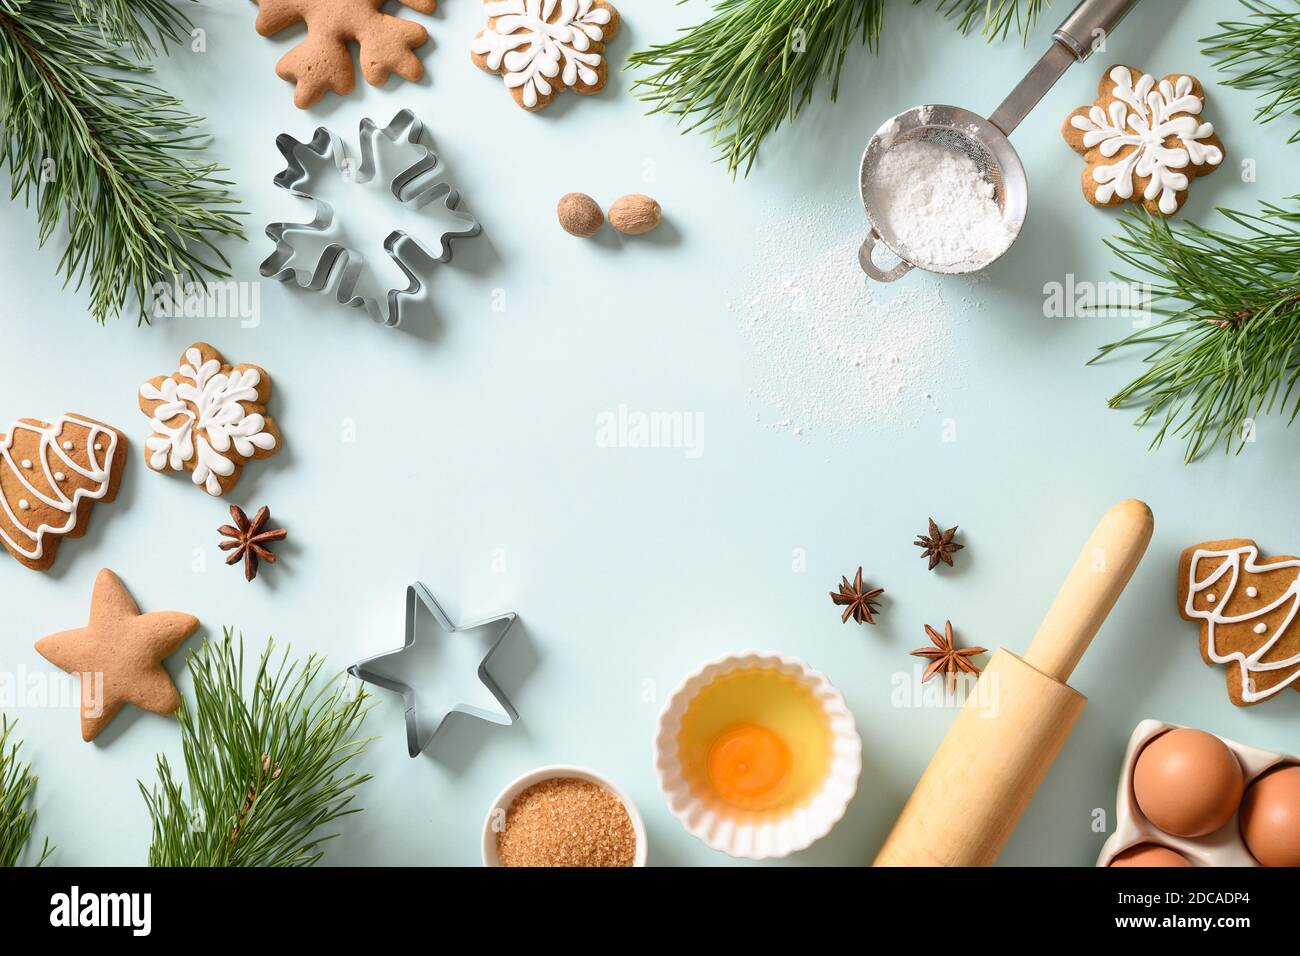 Christmas, New Year holiday cooking background. Ingredients, spi Stock  Photo by ©unixx.0.gmail.com 166920436